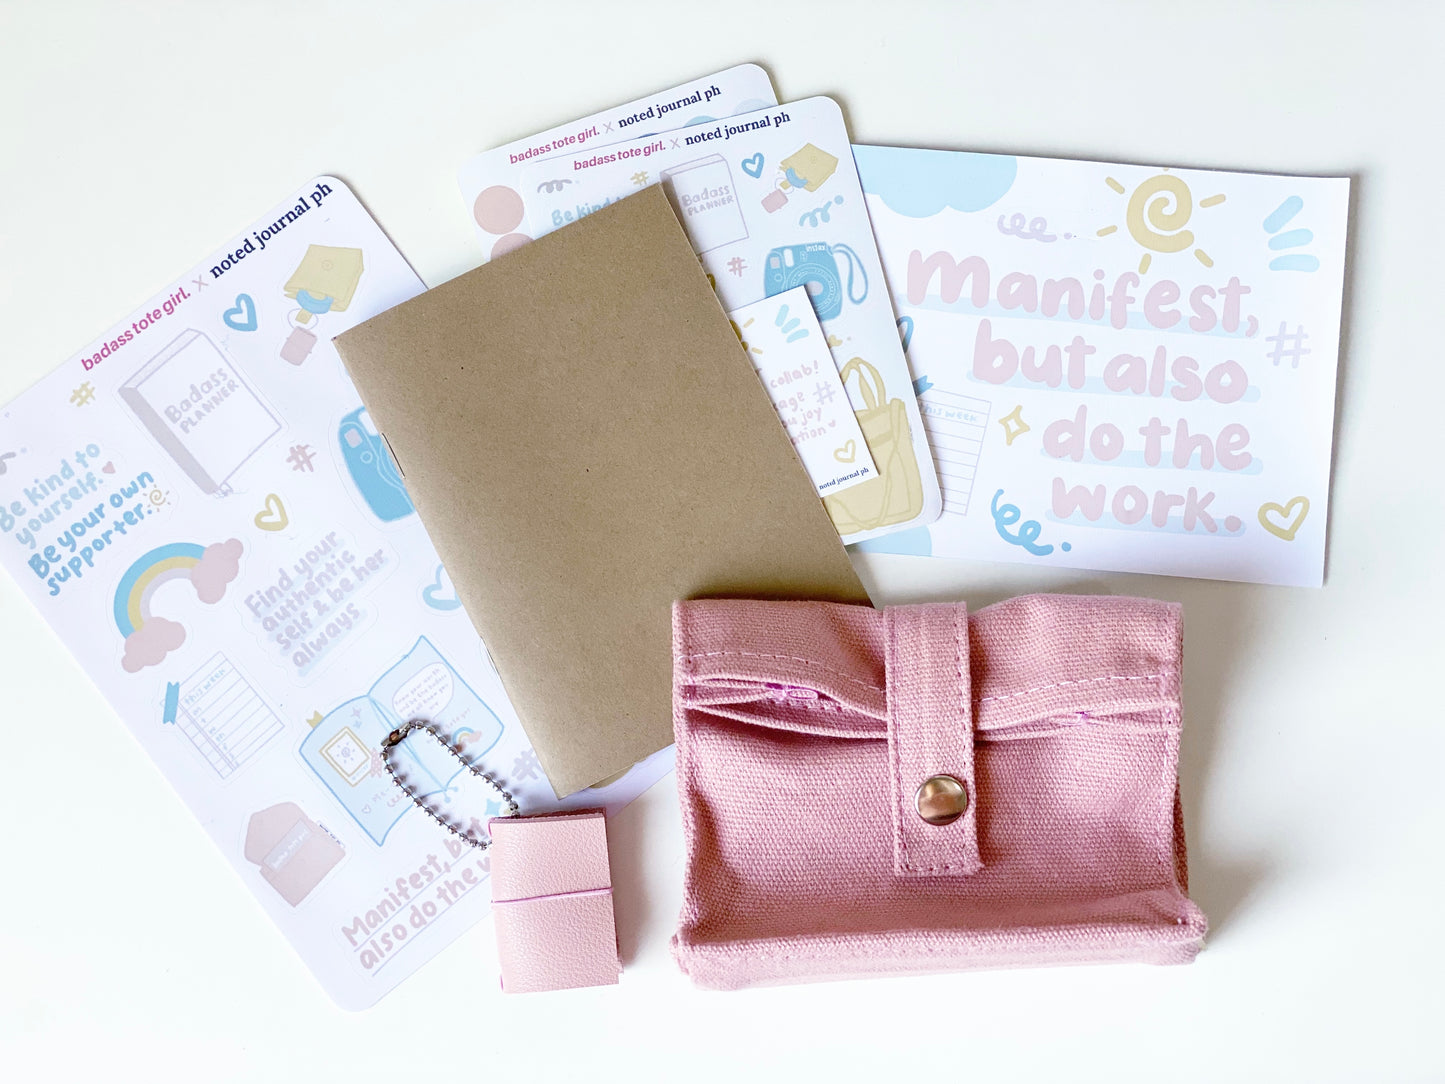 Daily Stationery Bundle - Collaboration with Badass Tote Girl